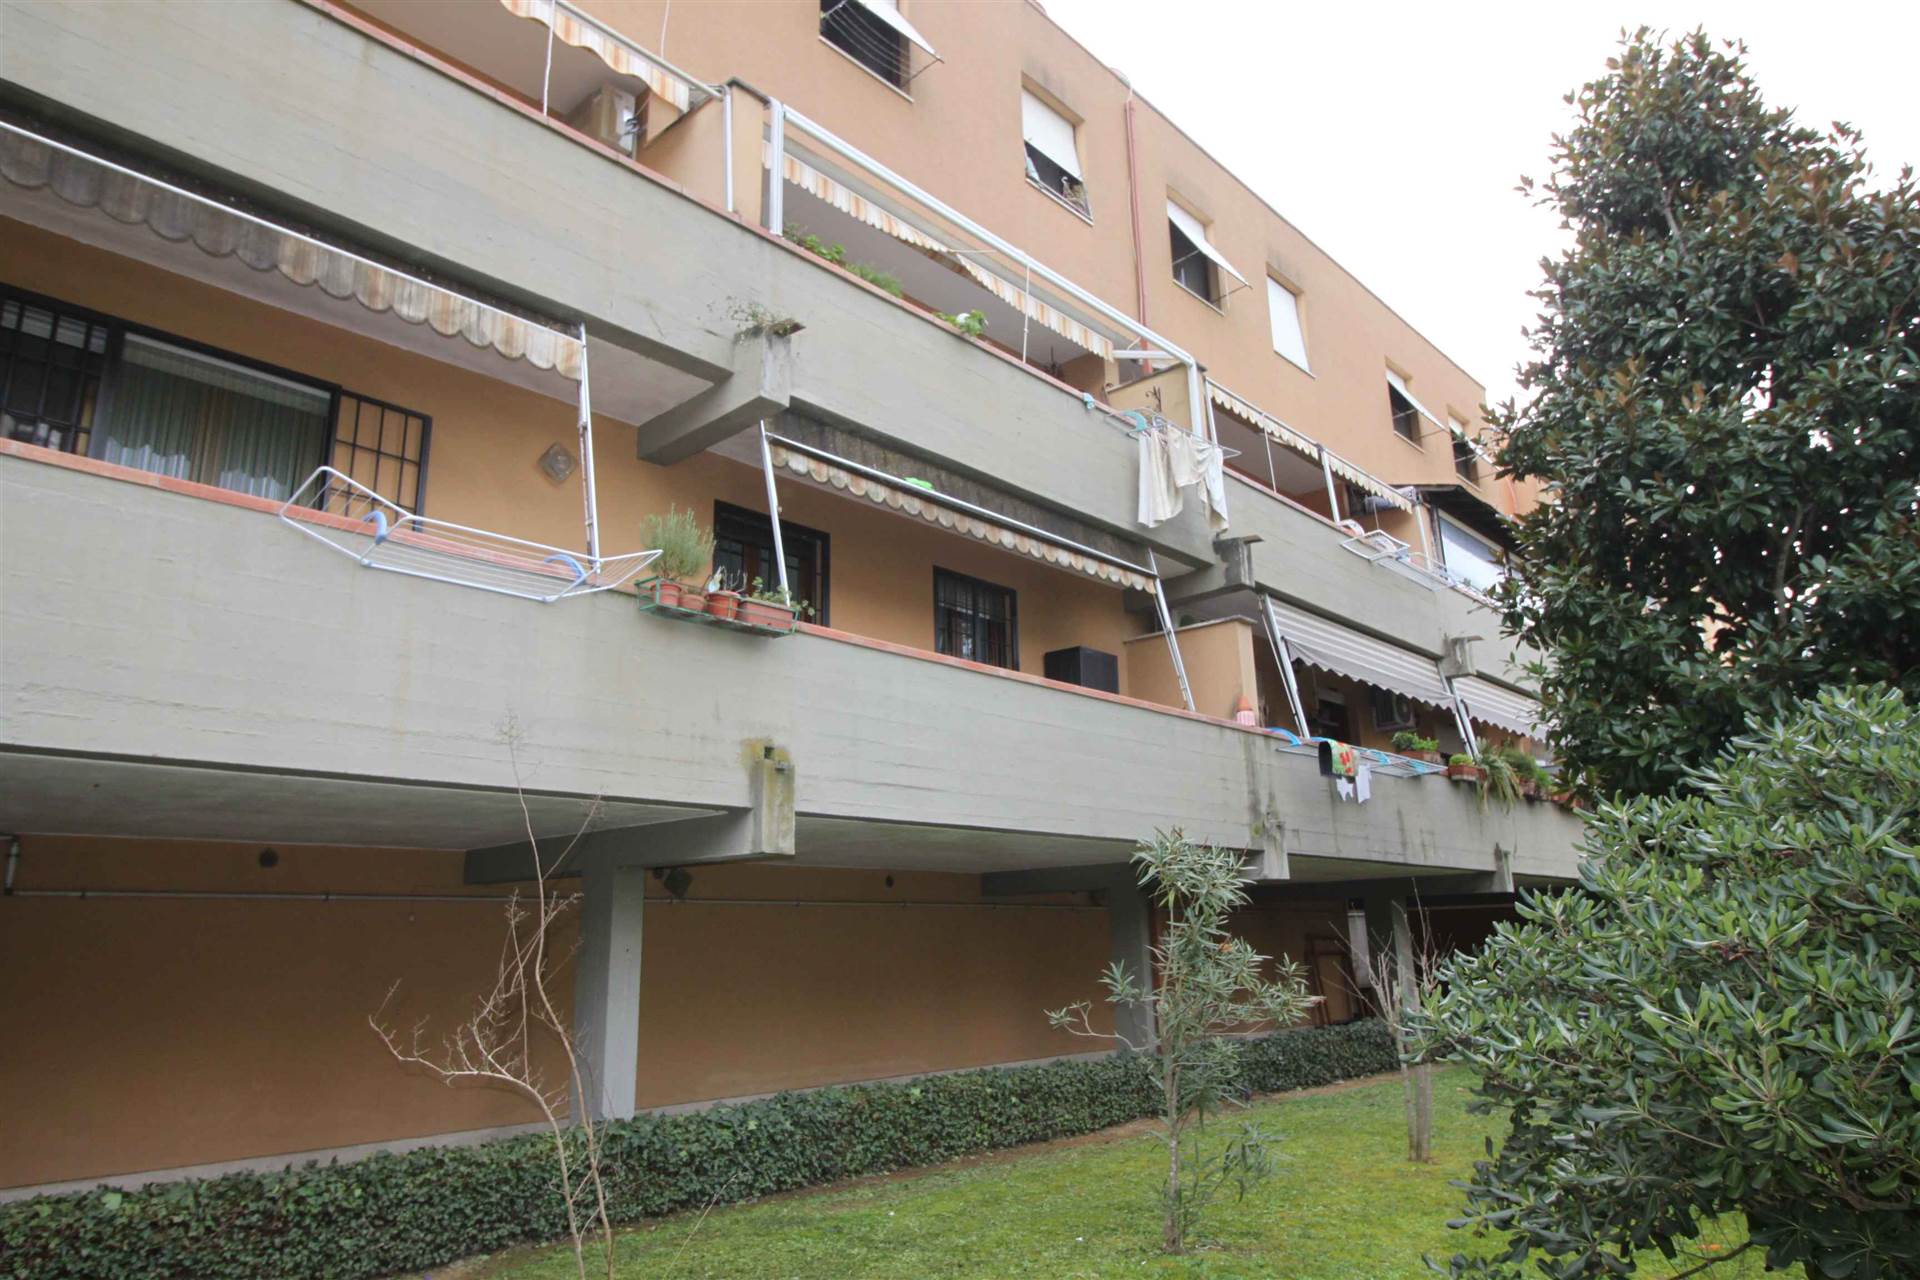 OSPEDALE, GROSSETO, Apartment for sale of 115 Sq. mt., Be restored, Heating Individual heating system, Energetic class: G, placed at 2° on 3, composed by: 5 Rooms, Separate kitchen, , 3 Bedrooms, 2 